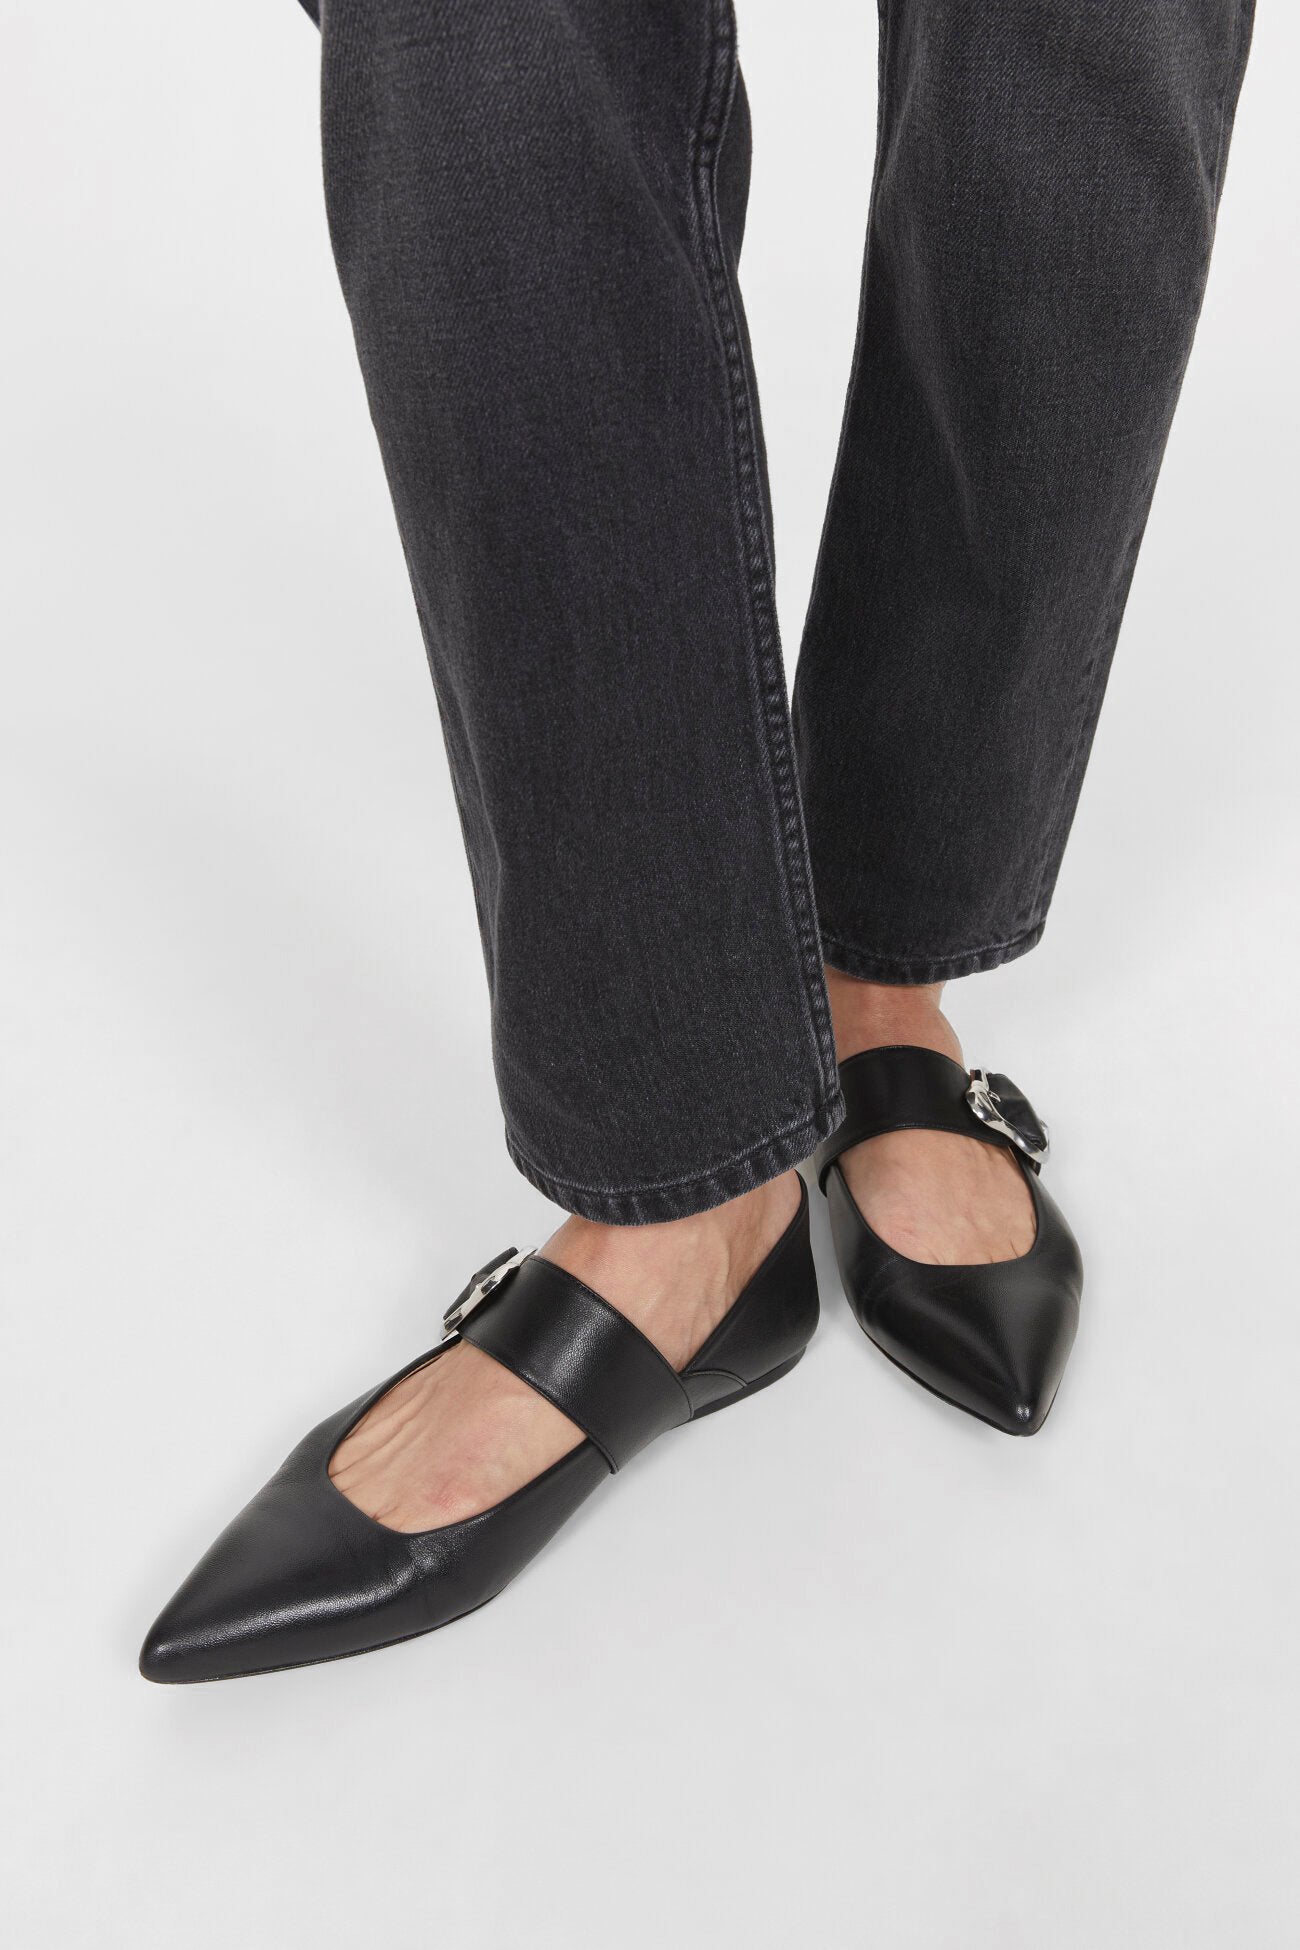 Aura Coral Flats in Black by Rodebjer http://www.shoprecital.com